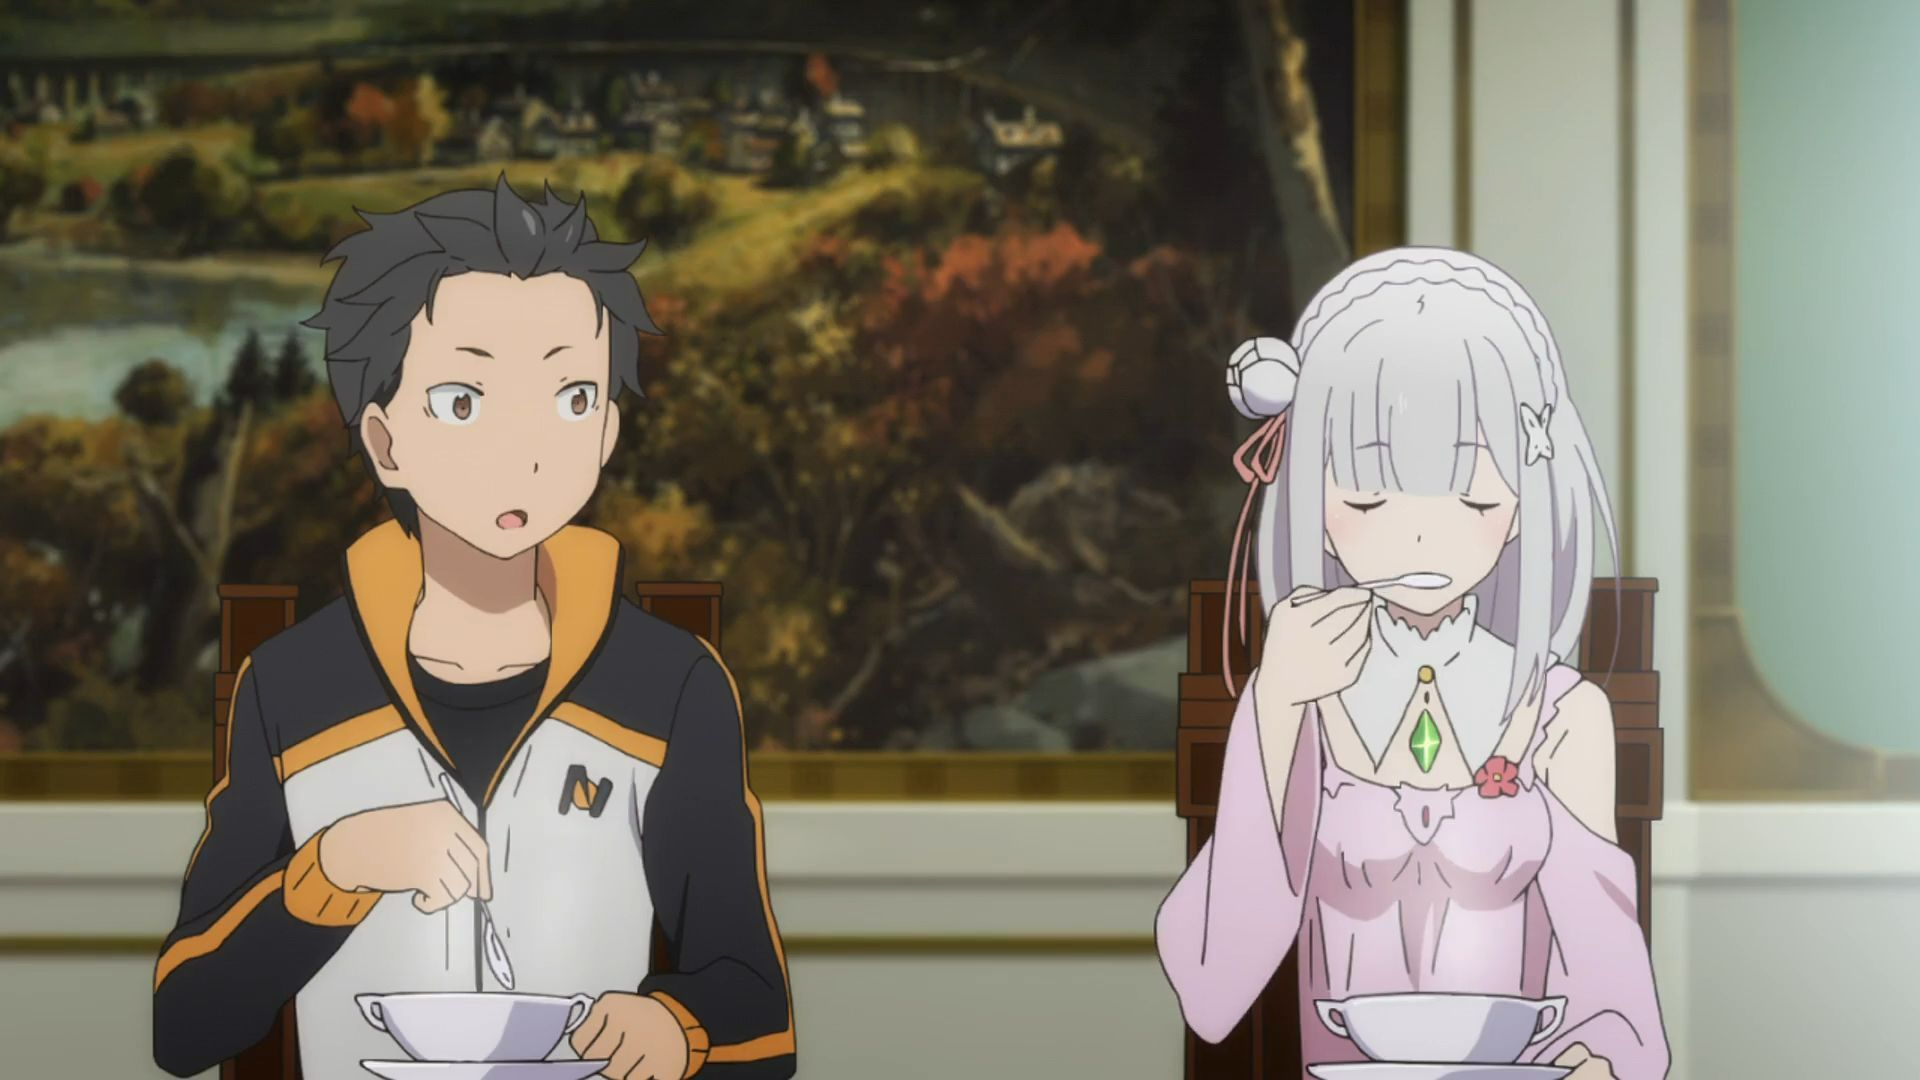 The English Dub - Re:Zero − Starting Life in Another World